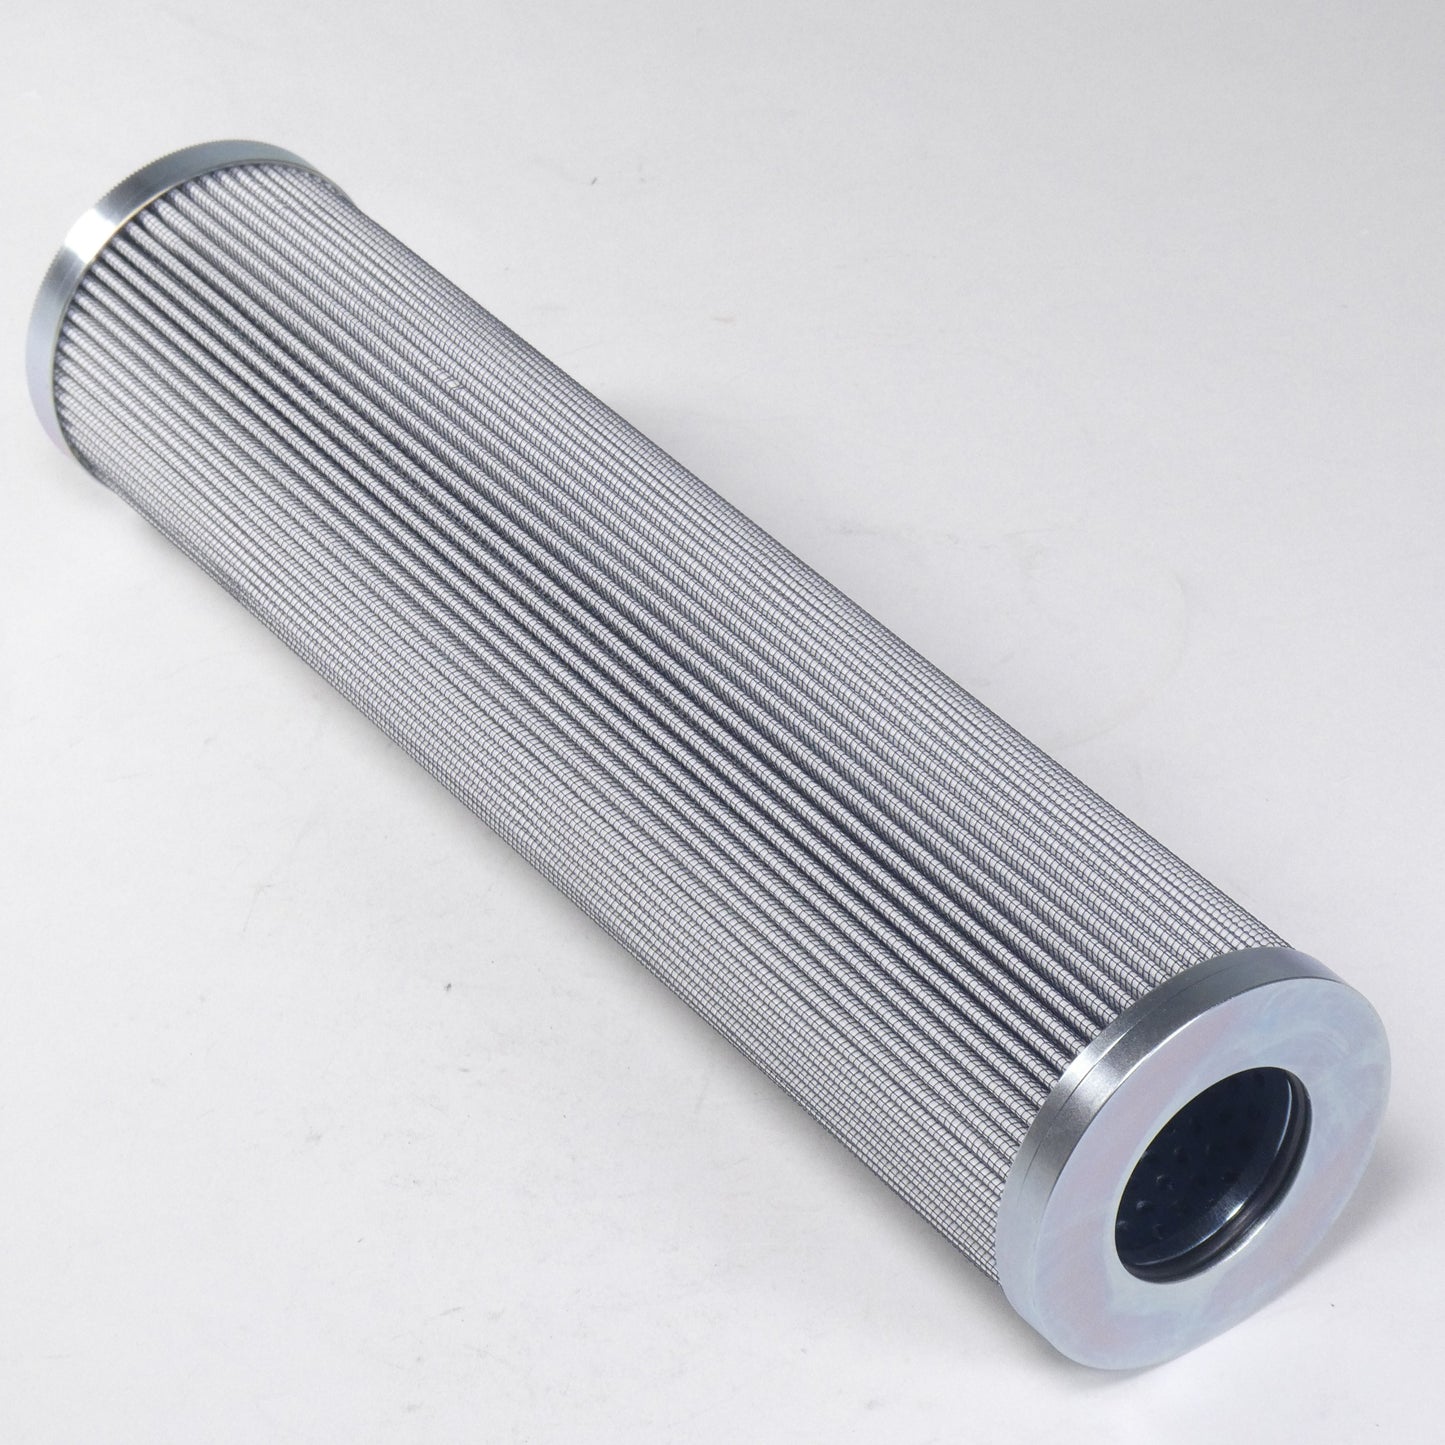 Hydrafil Replacement Filter Element for Hydac H-9601/13-010BH